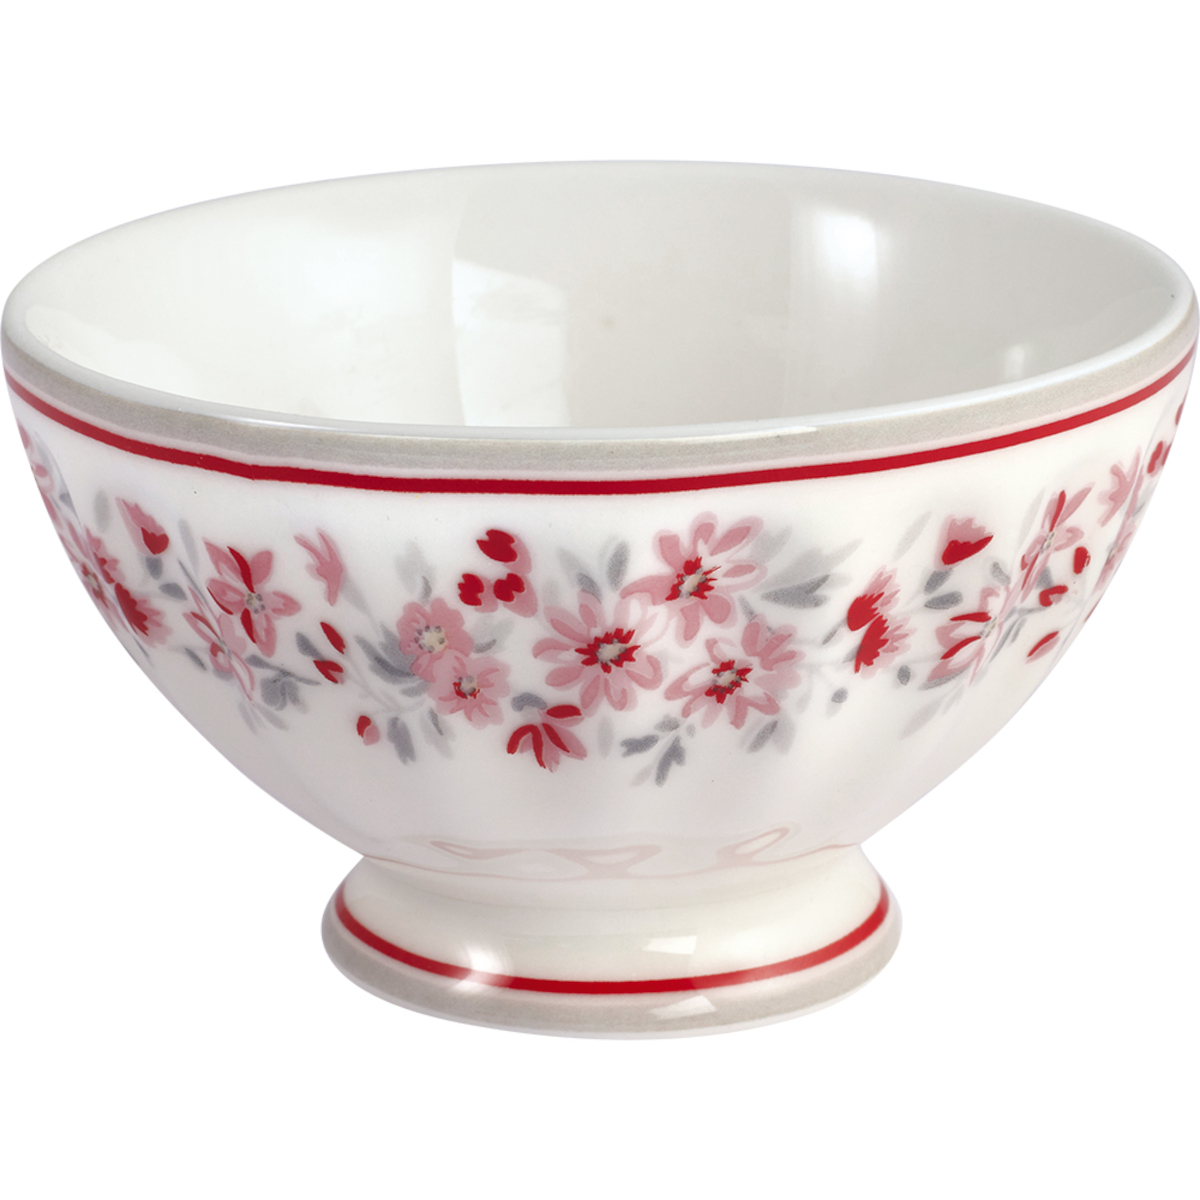 Greengate Emberly French Bowl weiss 0,18l